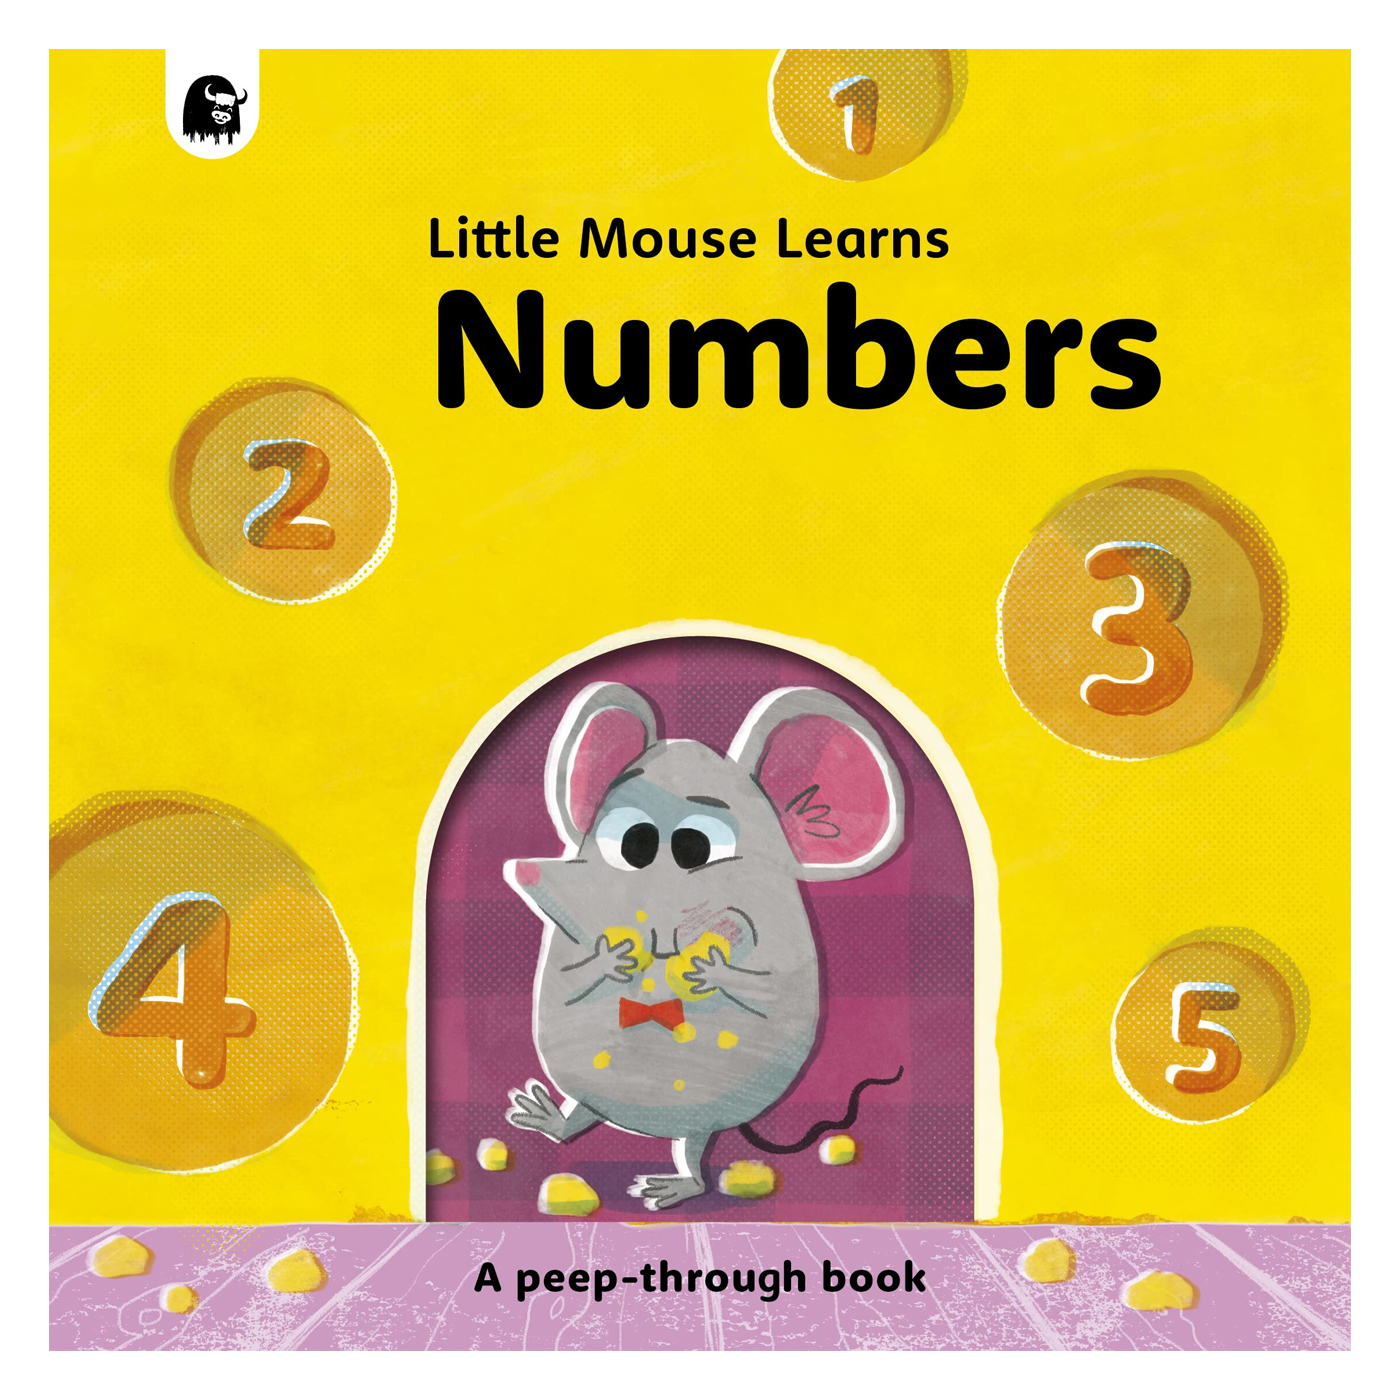  Little Mouse Learns Numbers